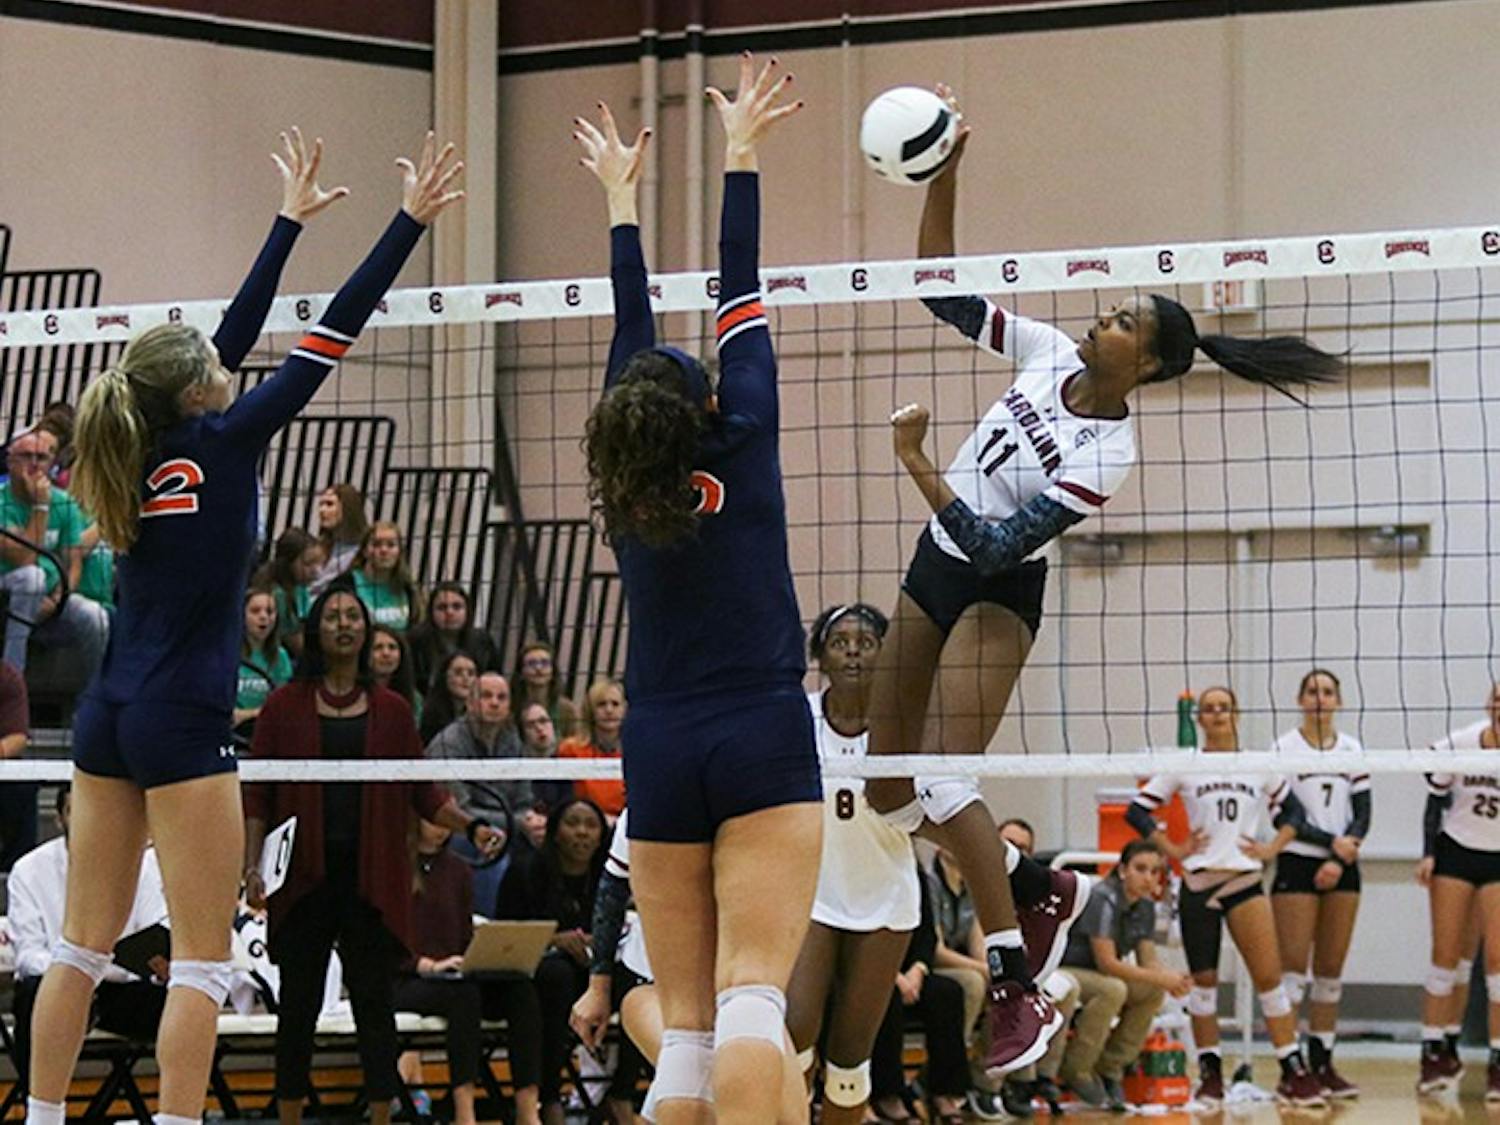 &nbsp;Senior middle blocker Mikayla Robinson spikes the ball while two of Auburn’s players go to block. During her four years at USC, Robinson ended with a career total of 983 kills and 81 blocks.&nbsp;